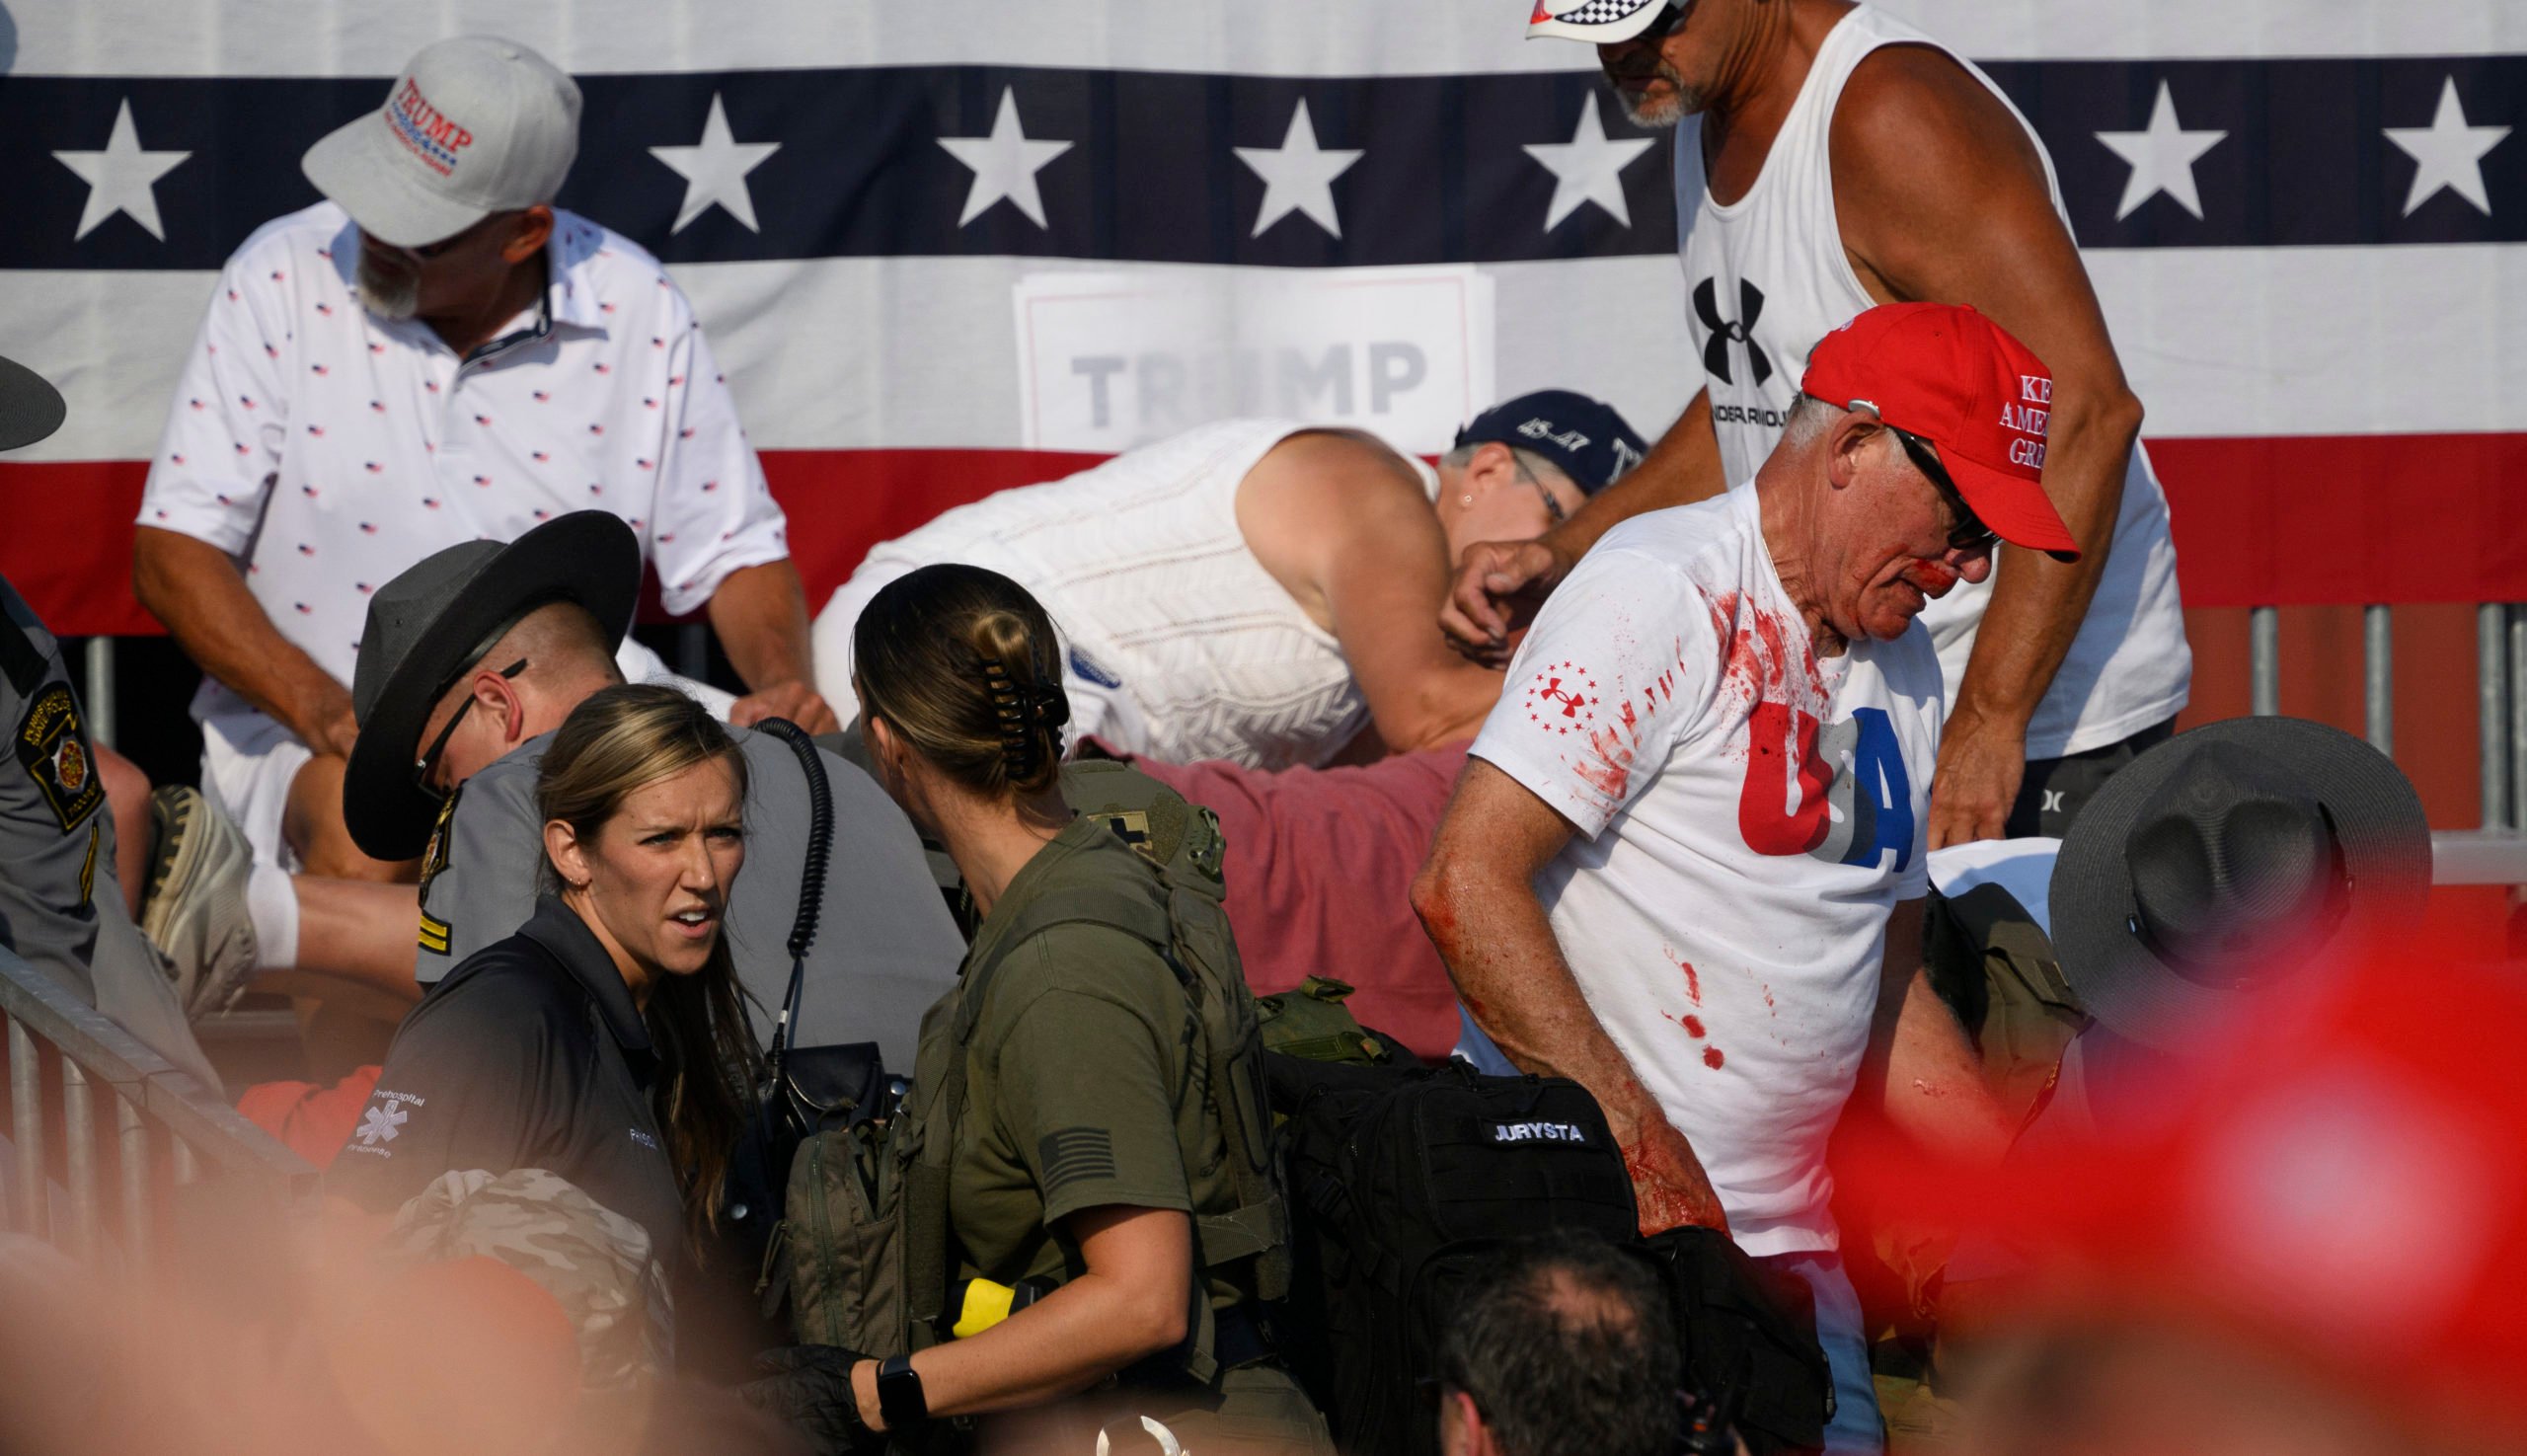 Audience members duck in the crowd during a shooting attempt at a campaign rally for Republican presidential candidate, former U.S. President Donald Trump at Butler Farm Show Inc. on July 13, 2024 in Butler, Pennsylvania. (Photo by Jeff Swensen/Getty Images)